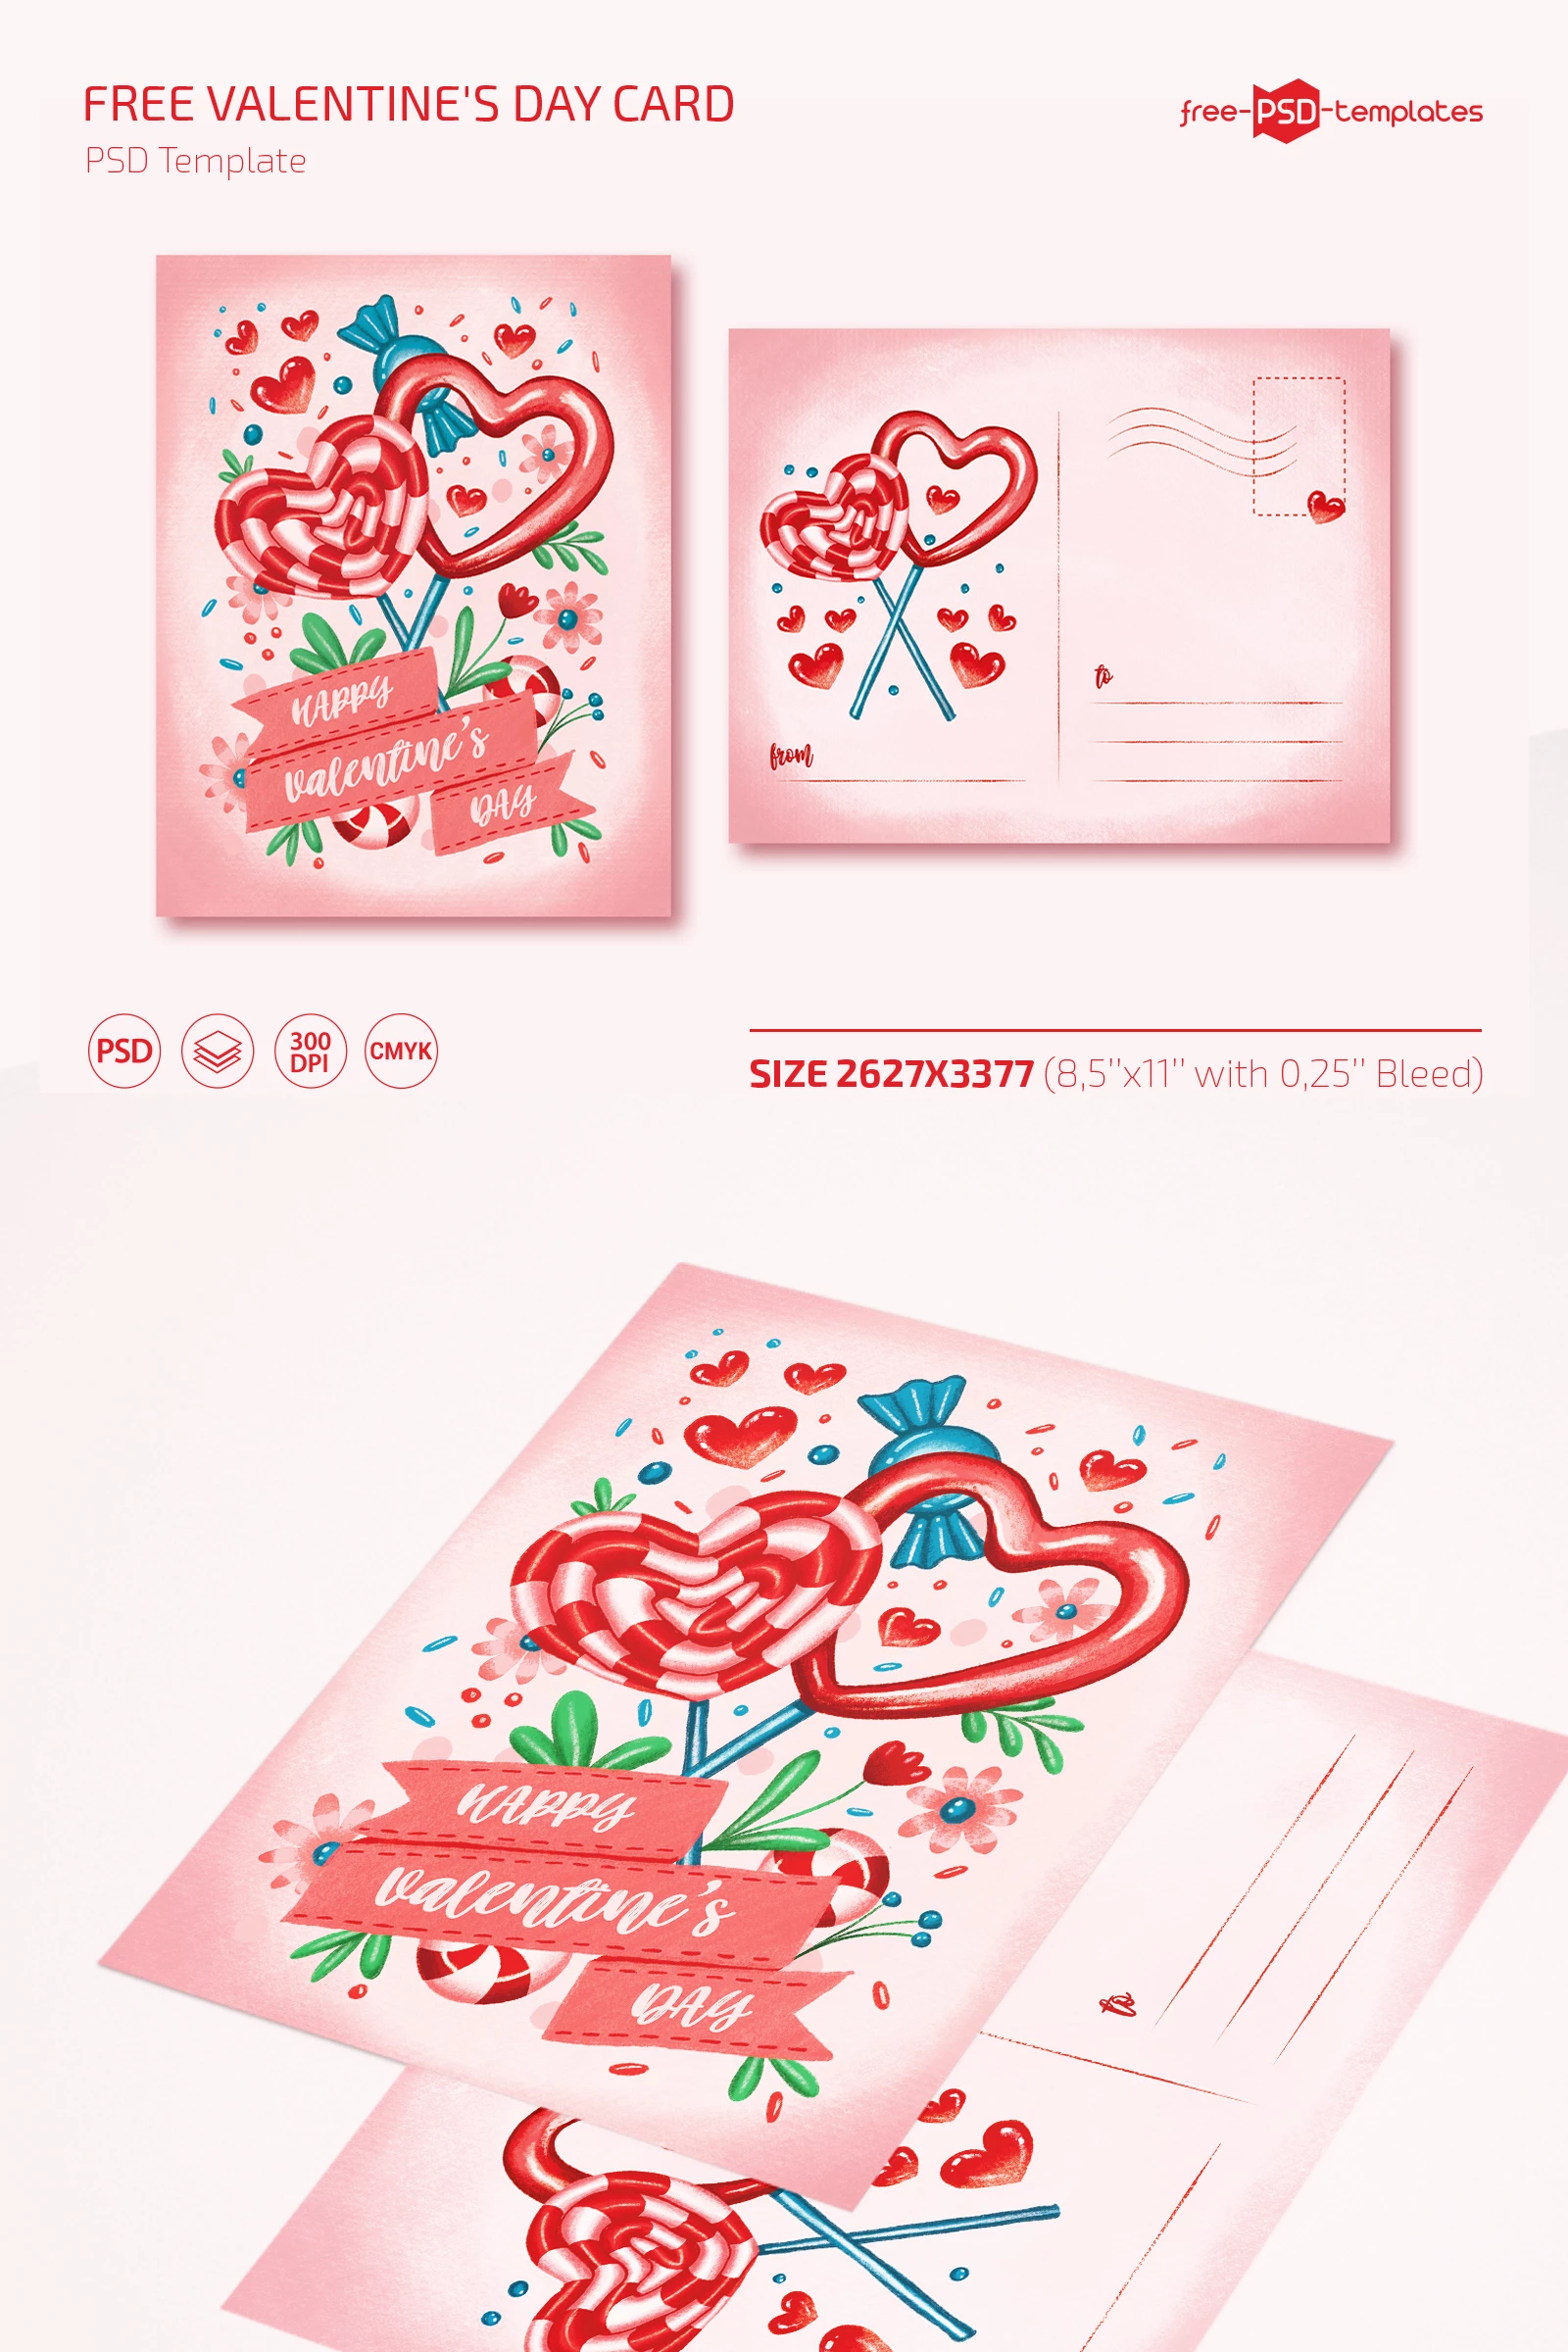 Free Valentine’s Day Card Template